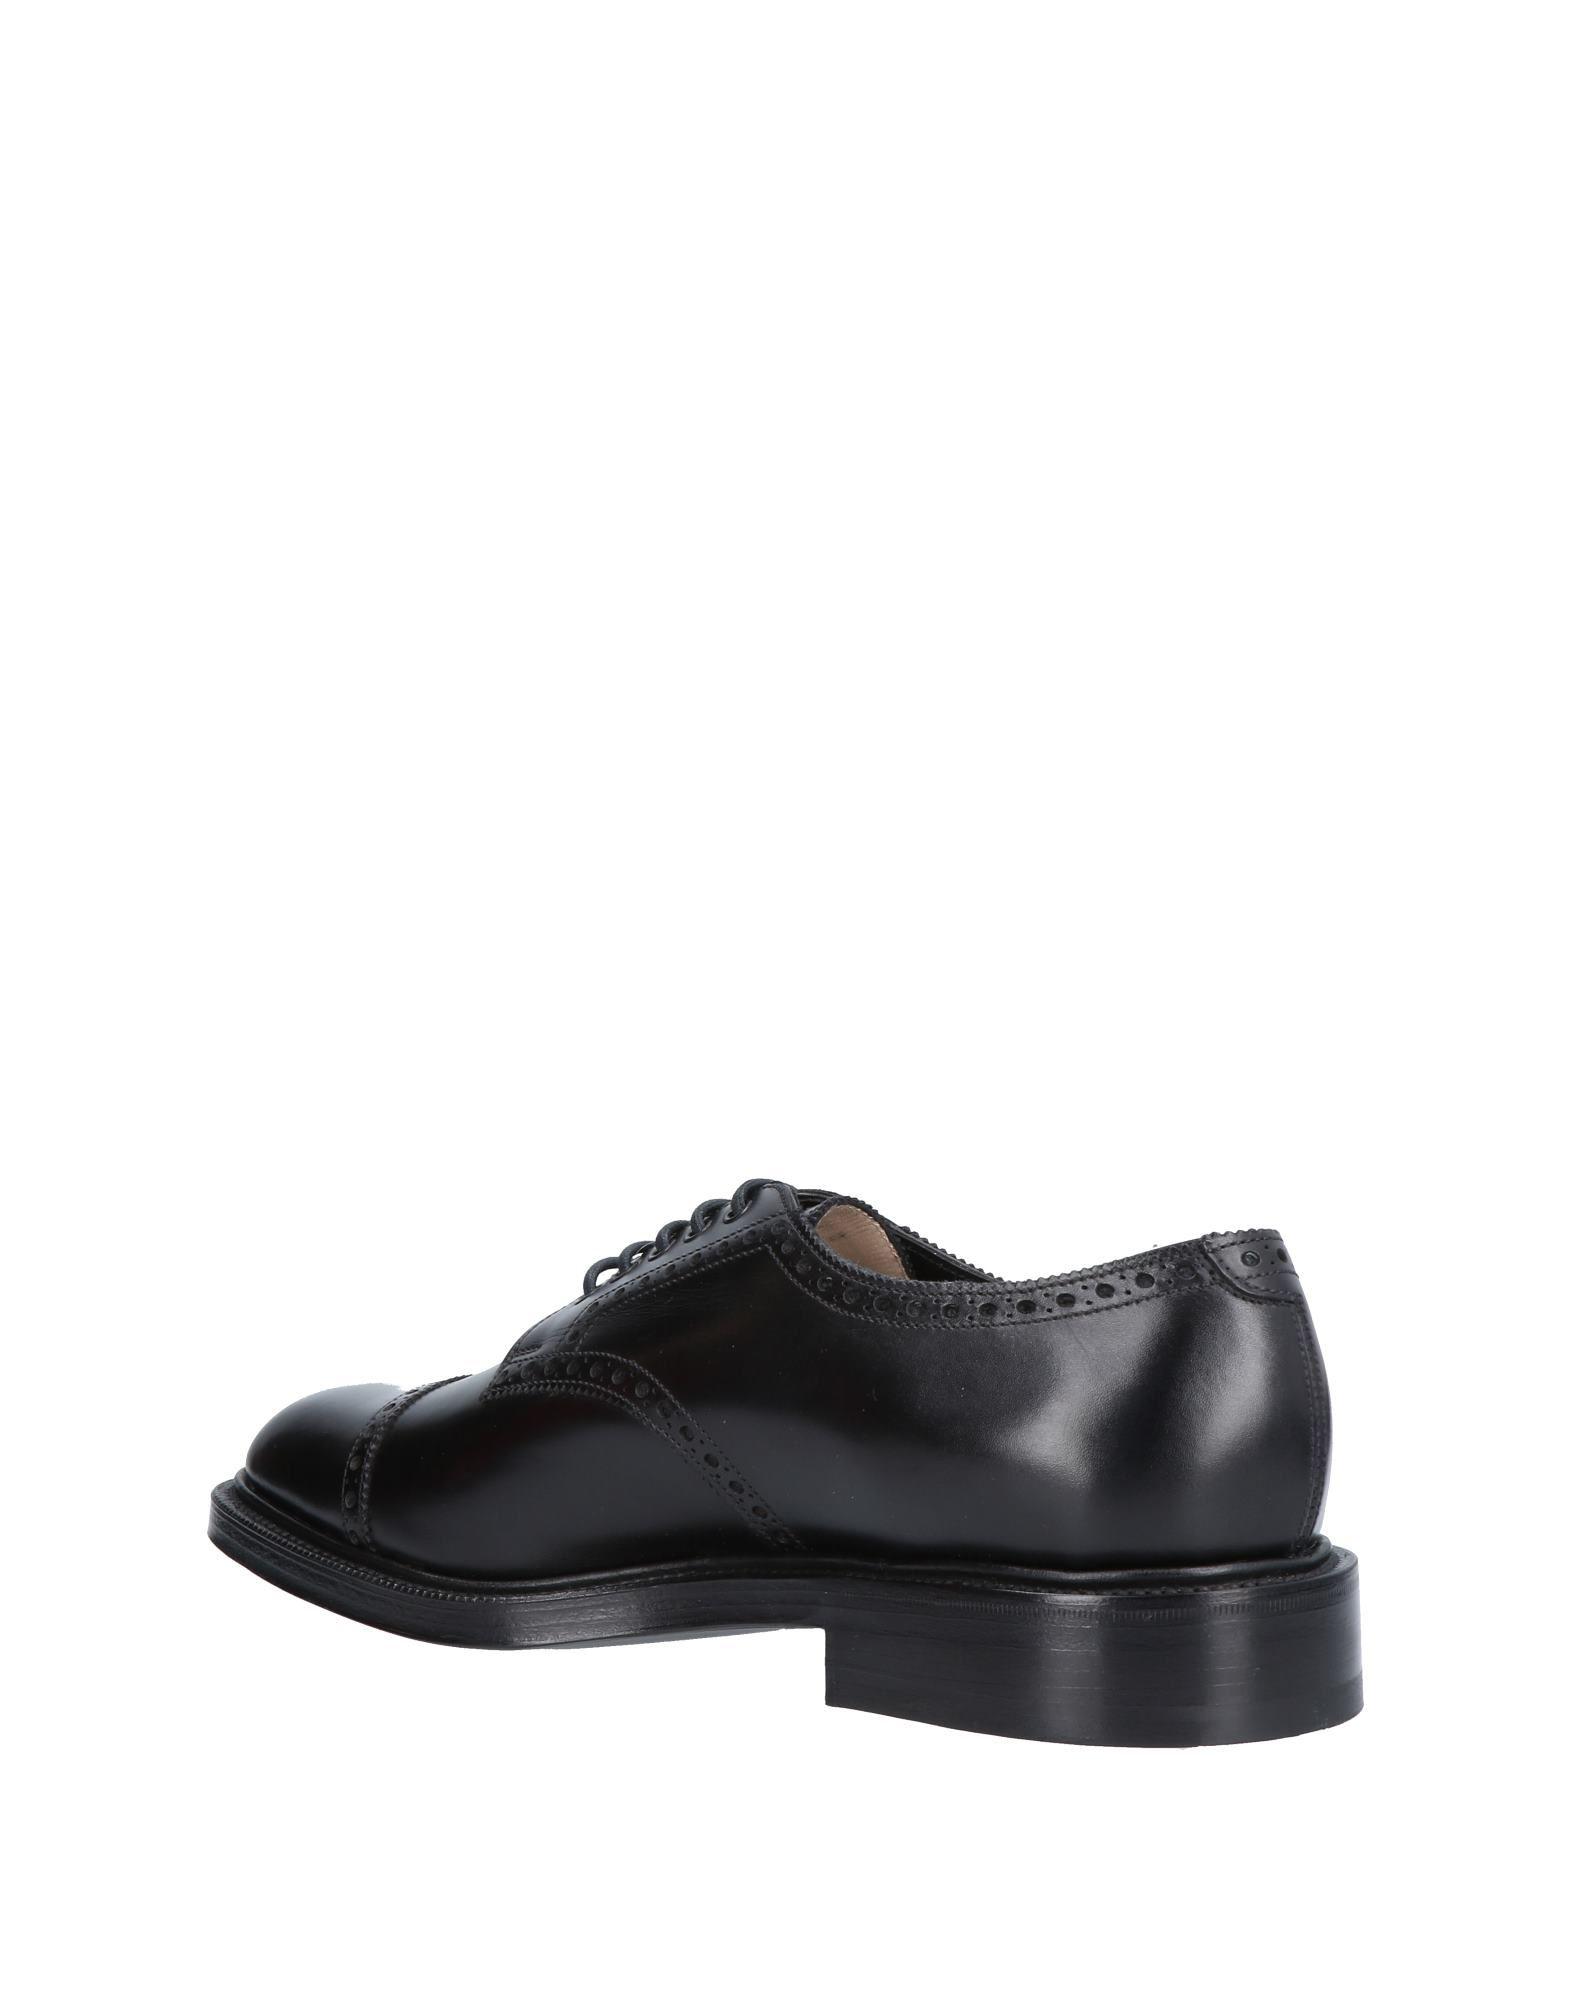 Mackintosh Leather Lace-up Shoe in Black for Men - Lyst